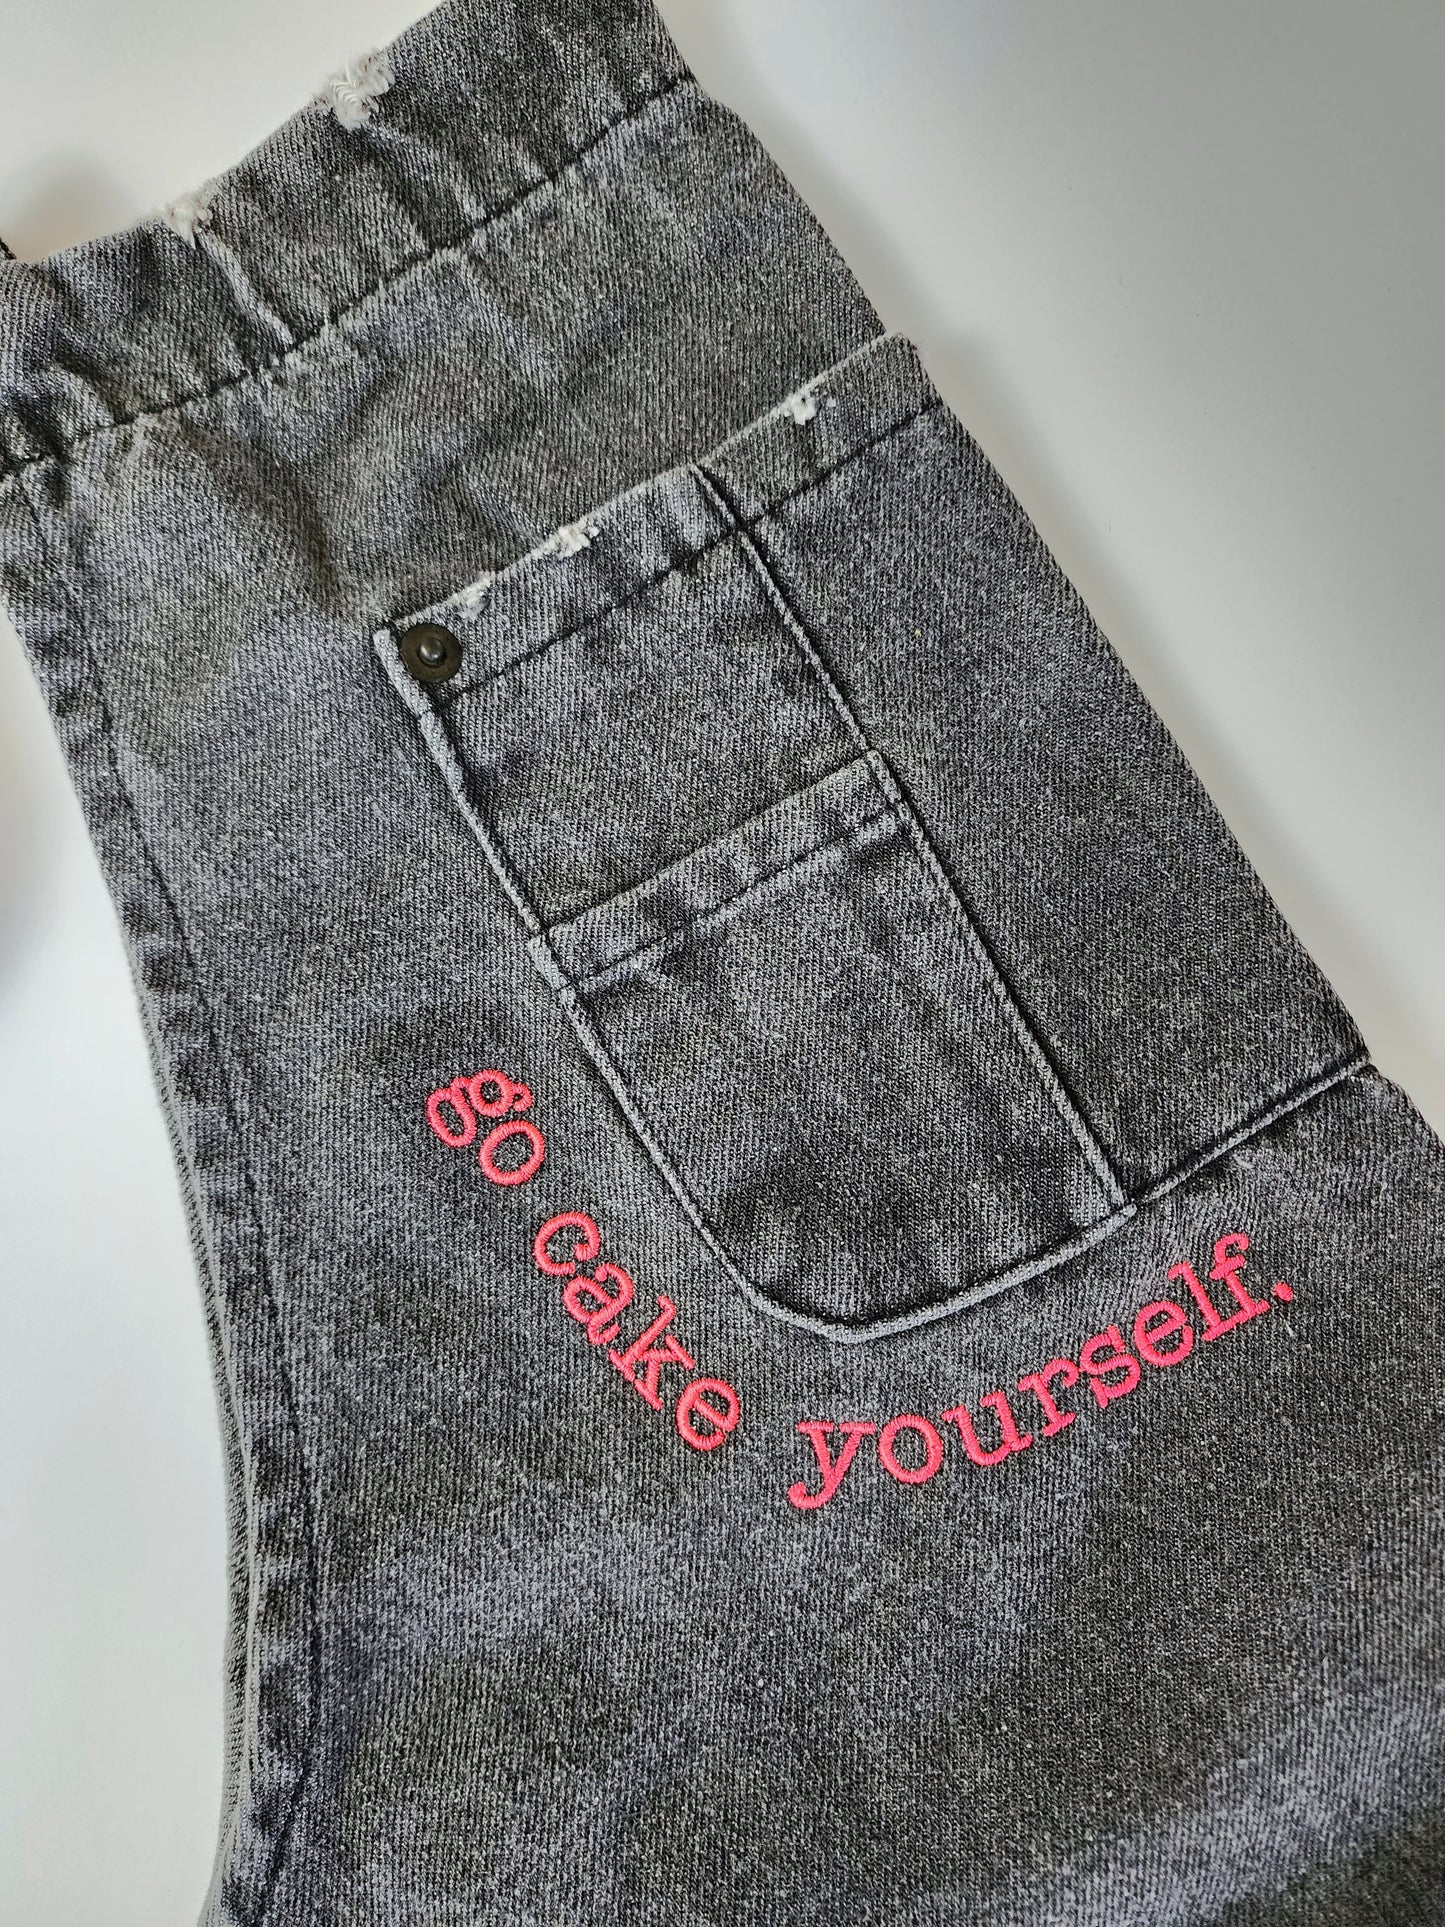 A closeup view of the corner of the breast pocket outlined with neon pink embroidery reading "go cake yourself." The font has a typewritten look and is somewhat discrete for the size of the apron. 